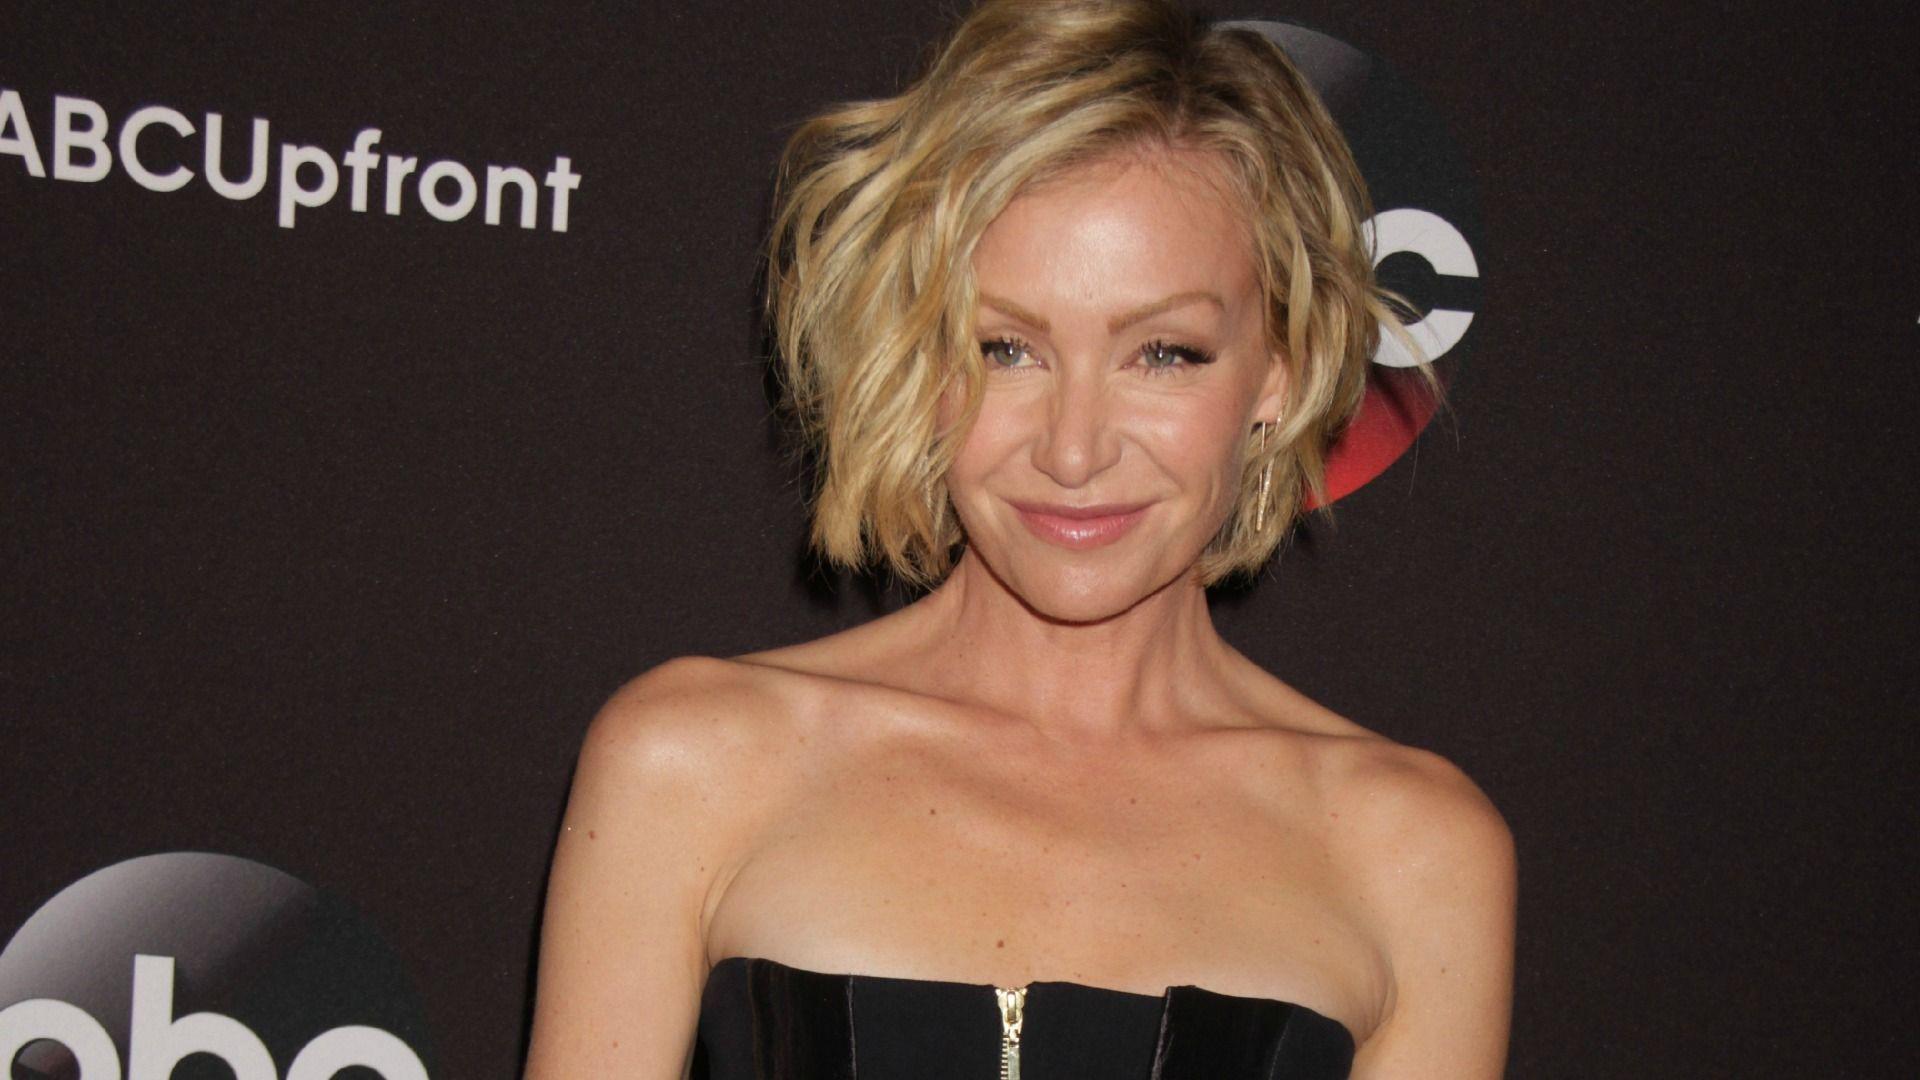 Portia de Rossi reveals her childhood struggle with an eating